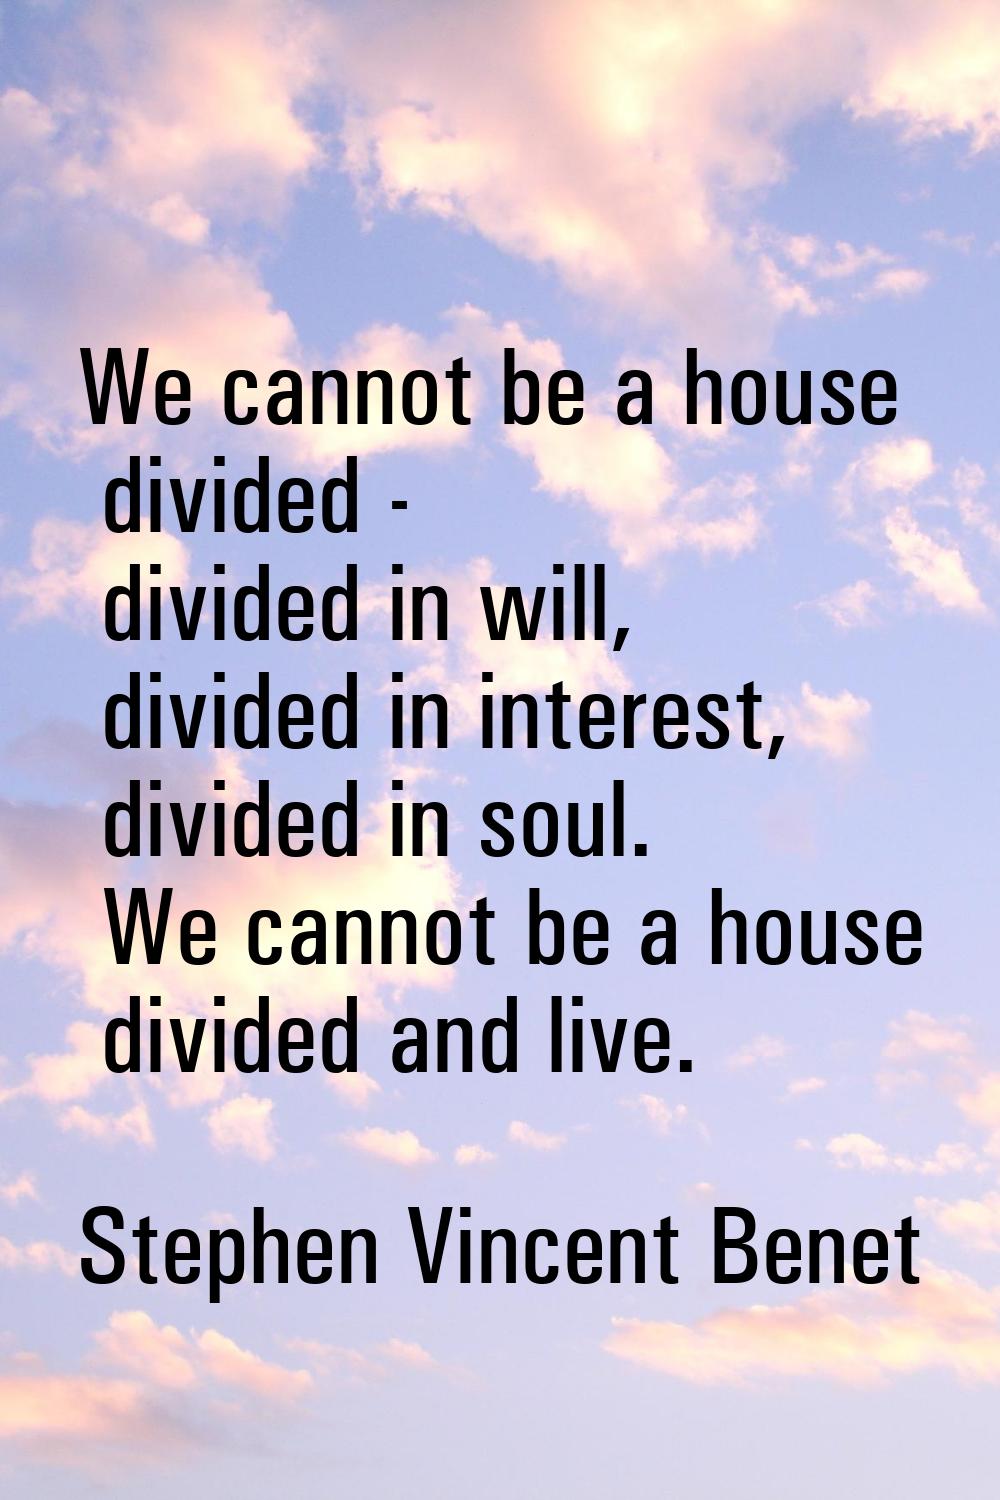 We cannot be a house divided - divided in will, divided in interest, divided in soul. We cannot be 